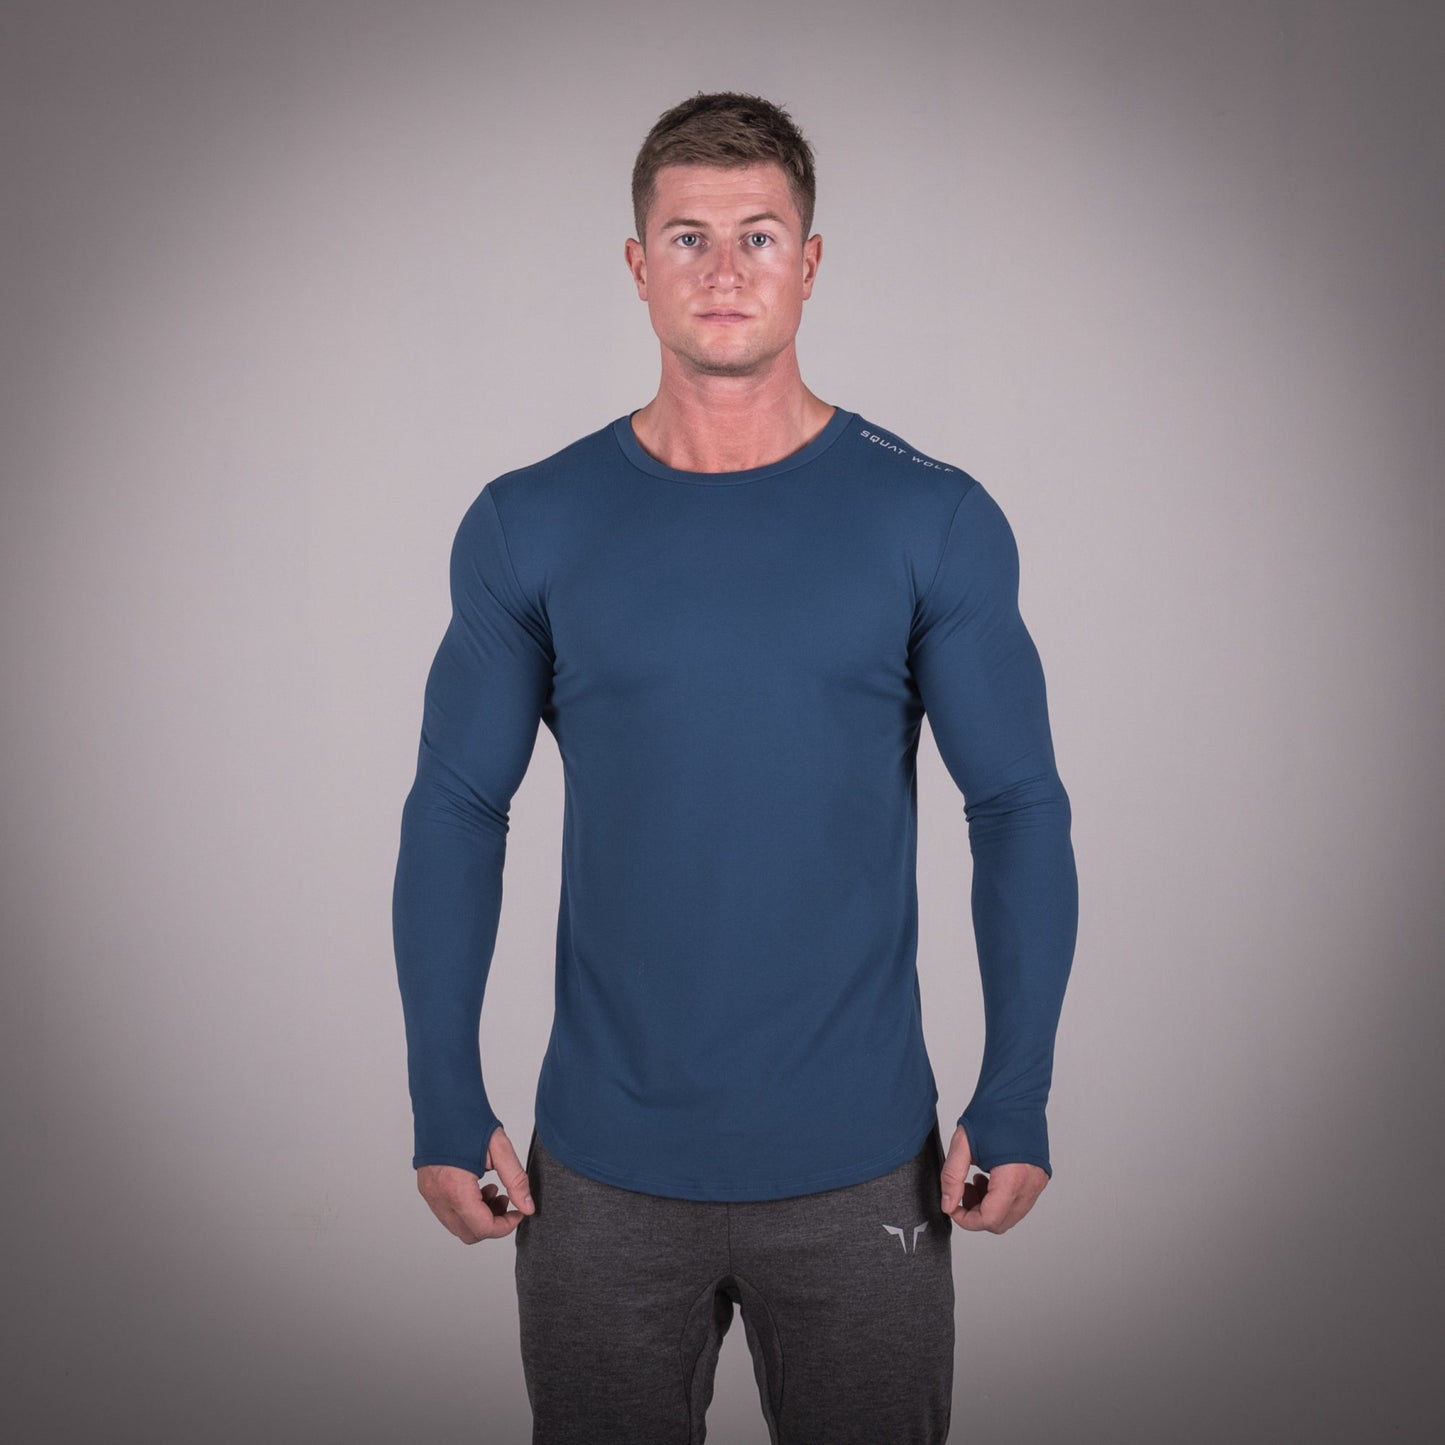 squatwolf-gym-wear-muscle-tee-blue-workout-t-shirts-for-men